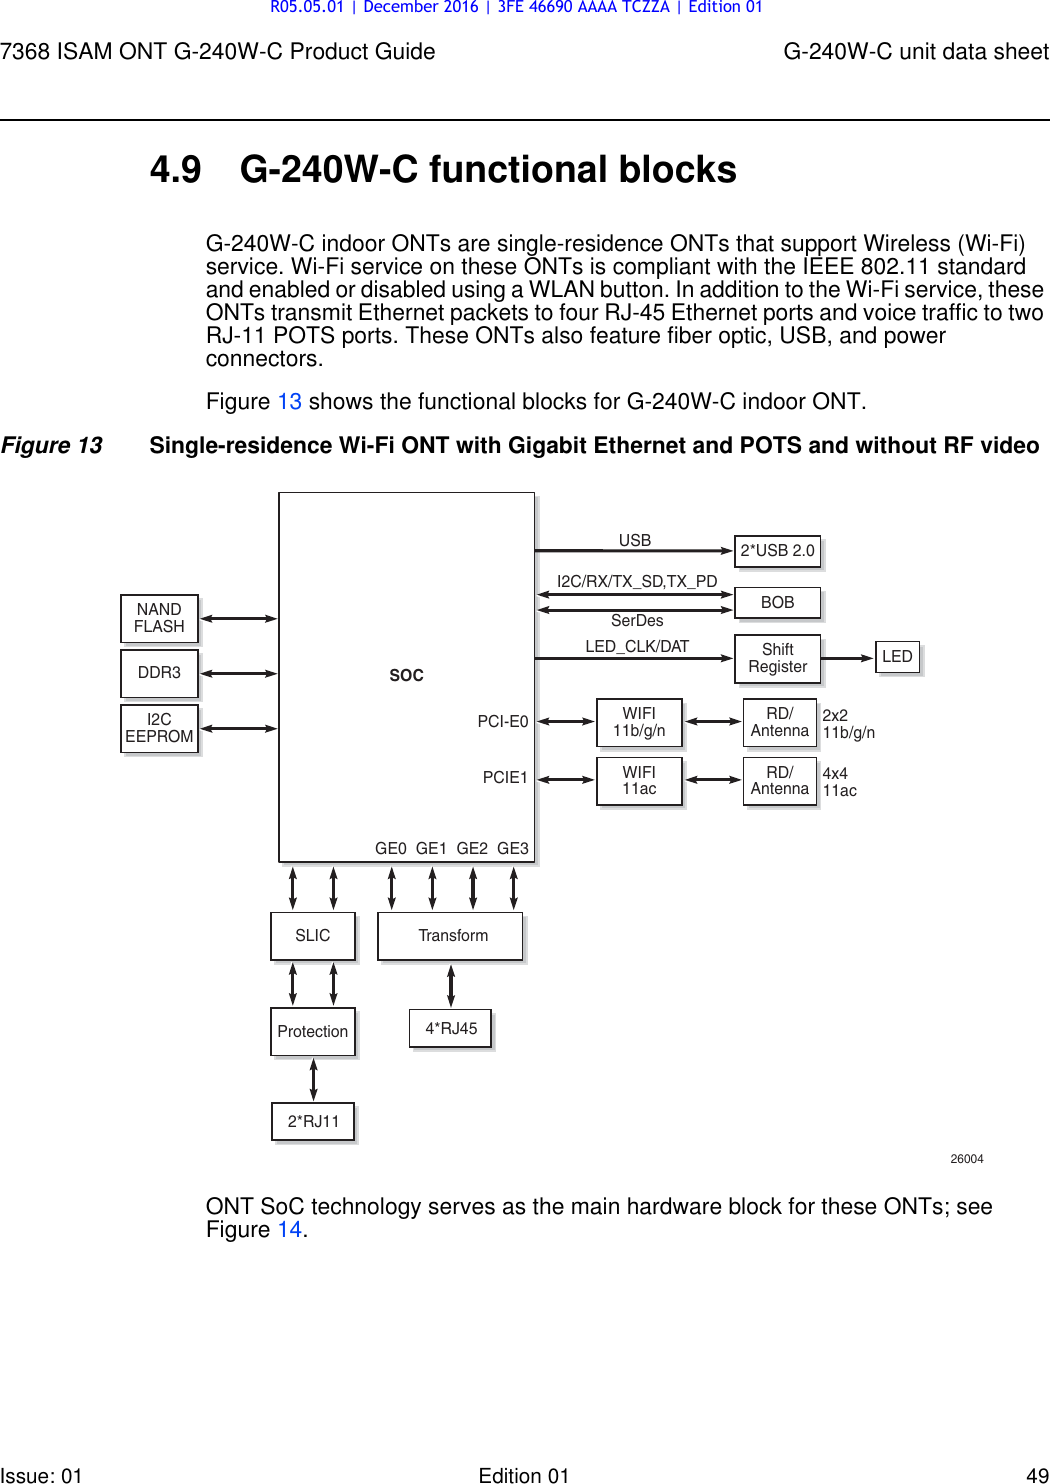 Page 49 of Nokia Bell G240W-C GPON ONU User Manual 7368 ISAM ONT G 240W B Product Guide